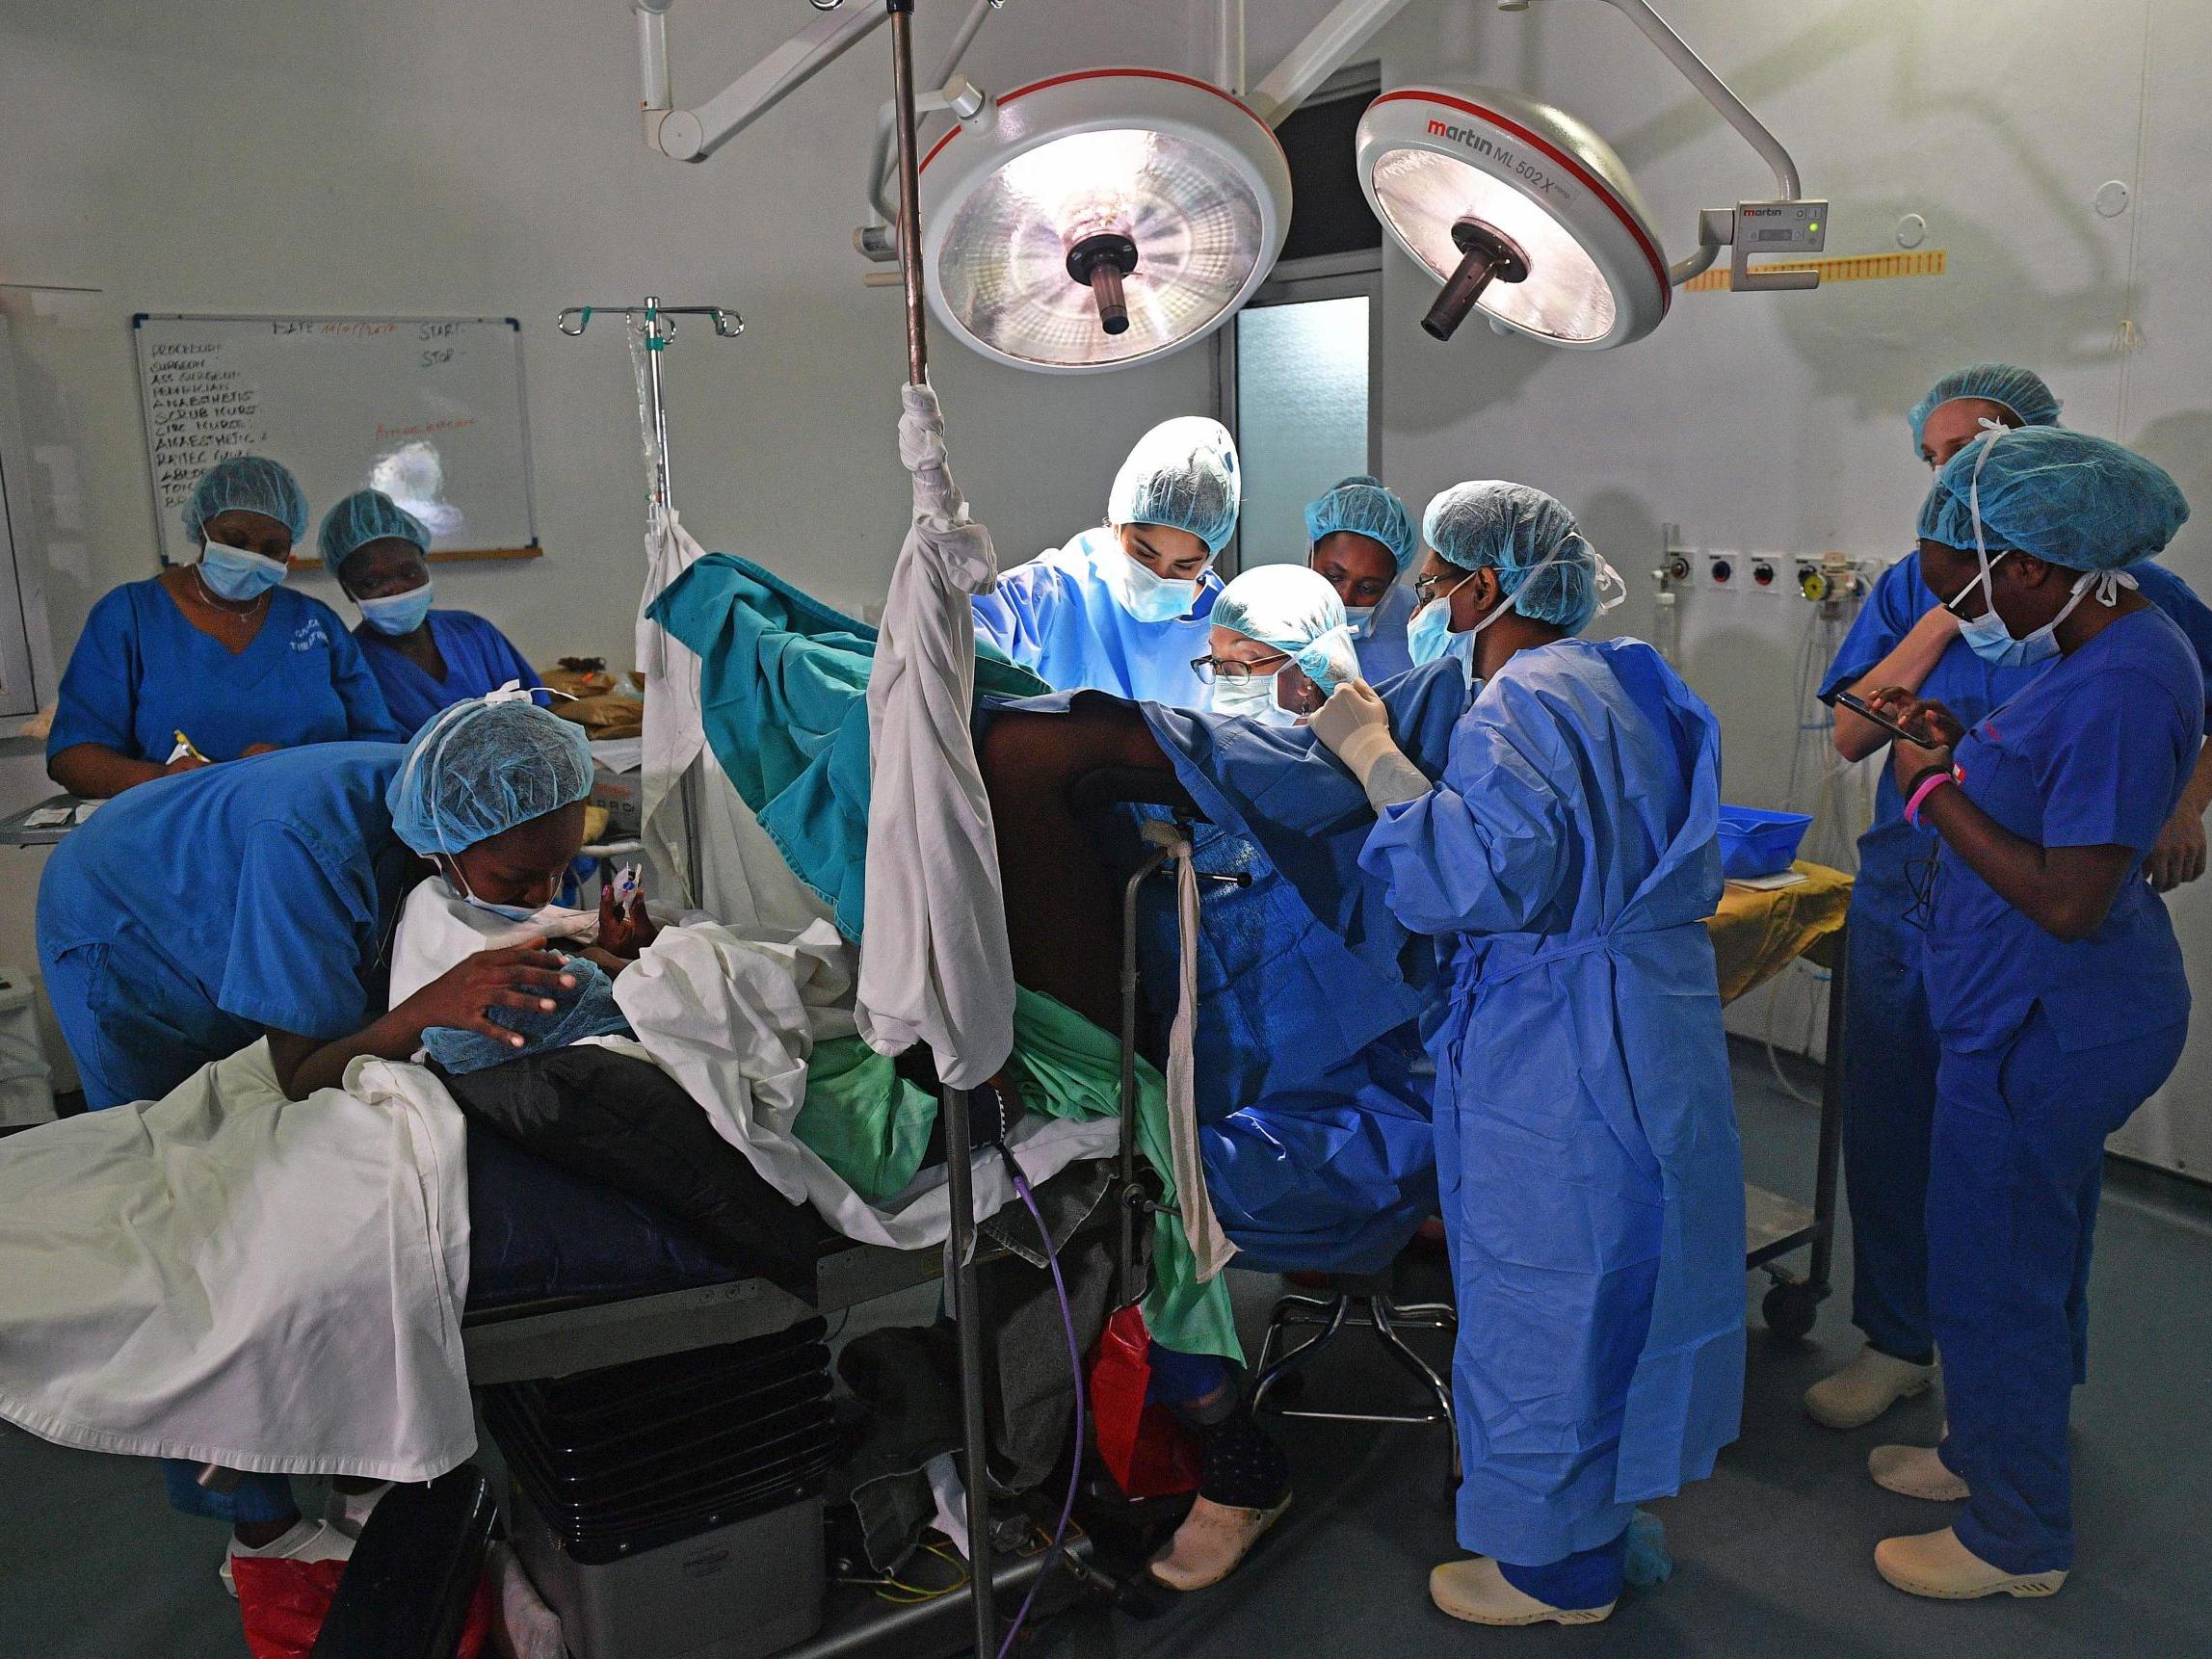 Gynecological surgeon Dr Marci Bowers begins the process of clitoral restoration on a patient in Nairobi in 2017